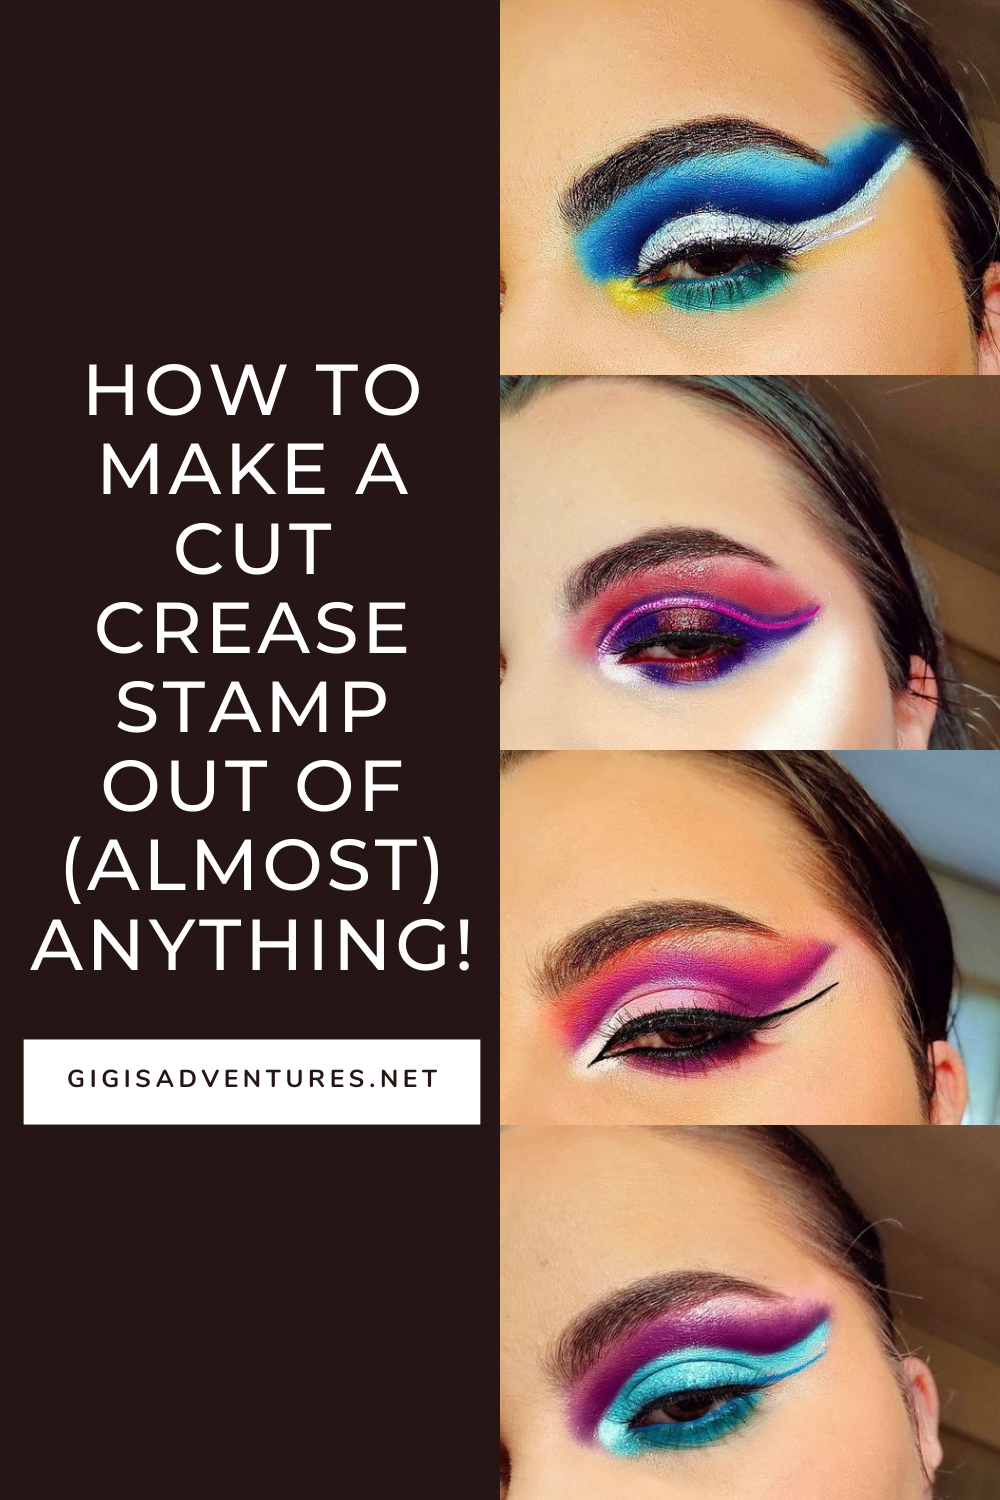 How To Make A Cut Crease Stamp At Home - Out Of (Almost) Anything!